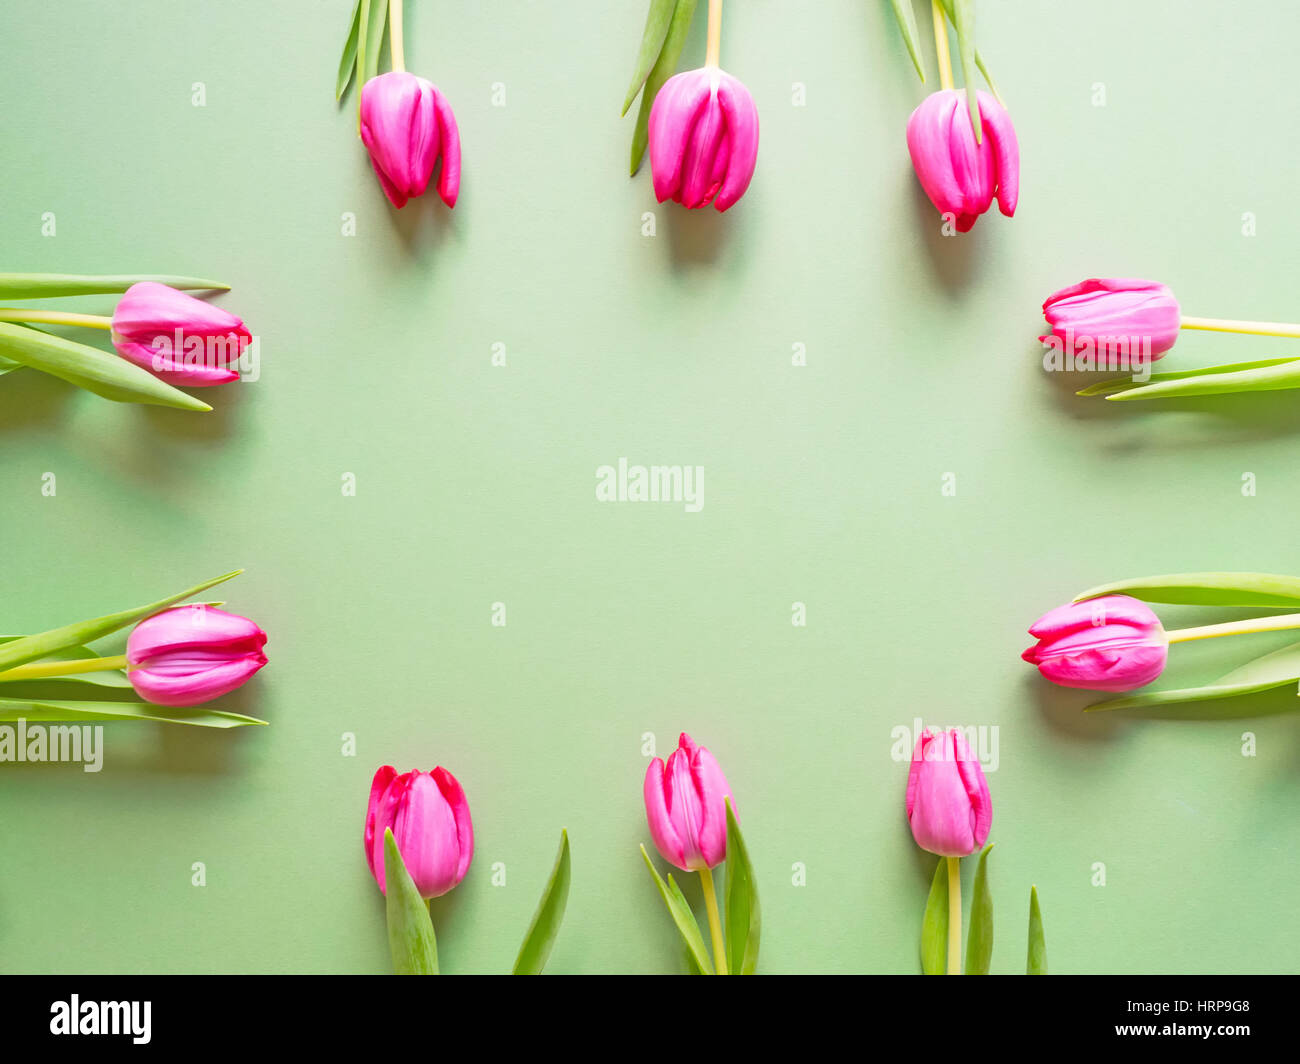 Spring-like background of green cardboard with pink blossoms of tulips at the edge Stock Photo